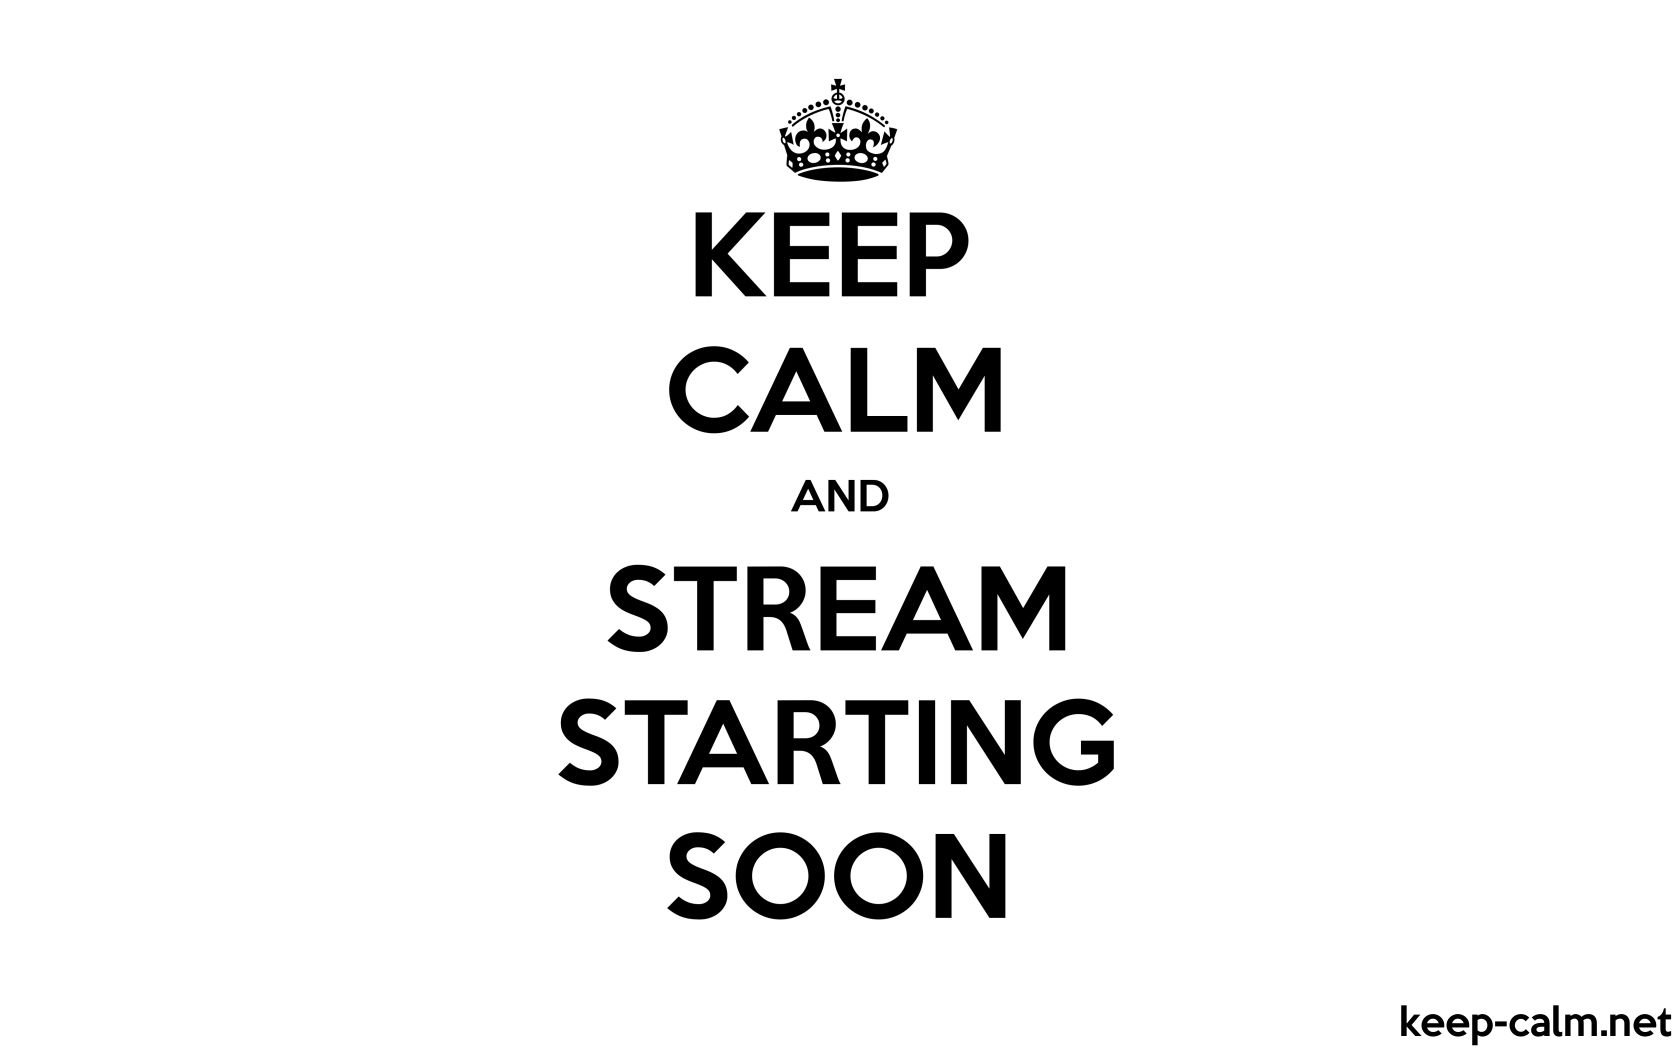 KEEP CALM AND STREAM STARTING SOON